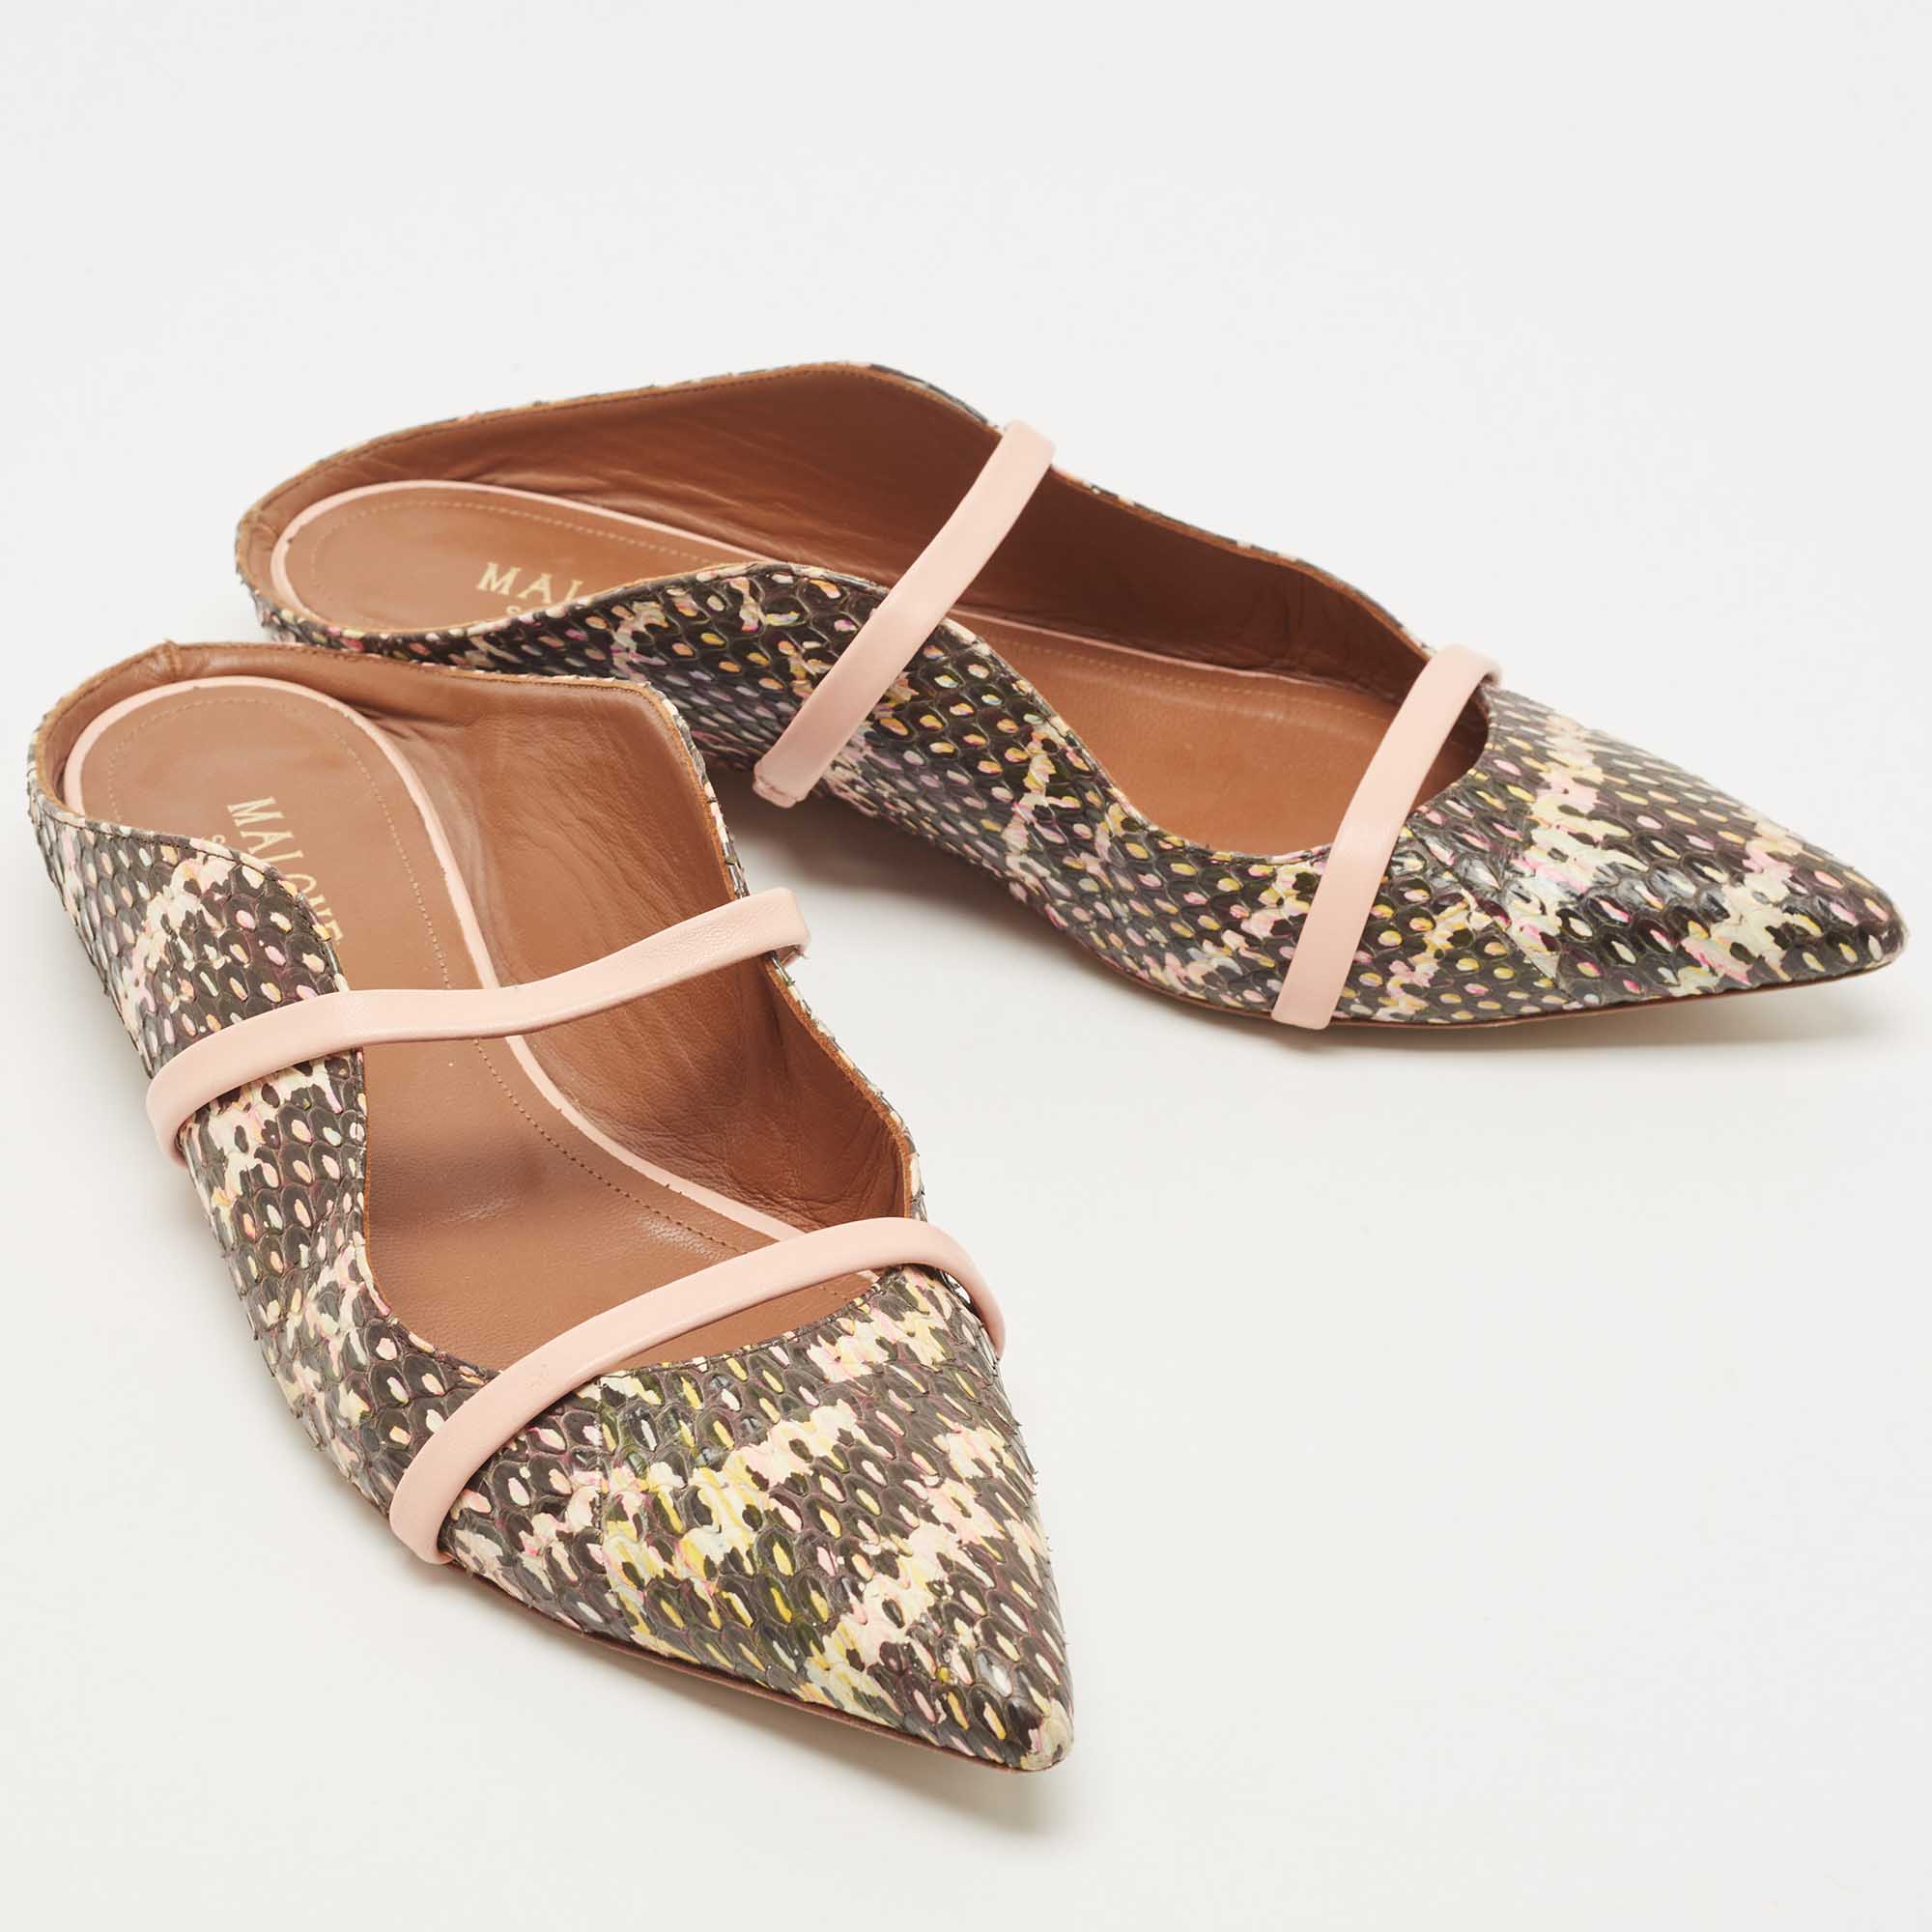 Malone Souliers  Multicolor Python  Maureen  Flats Size 38